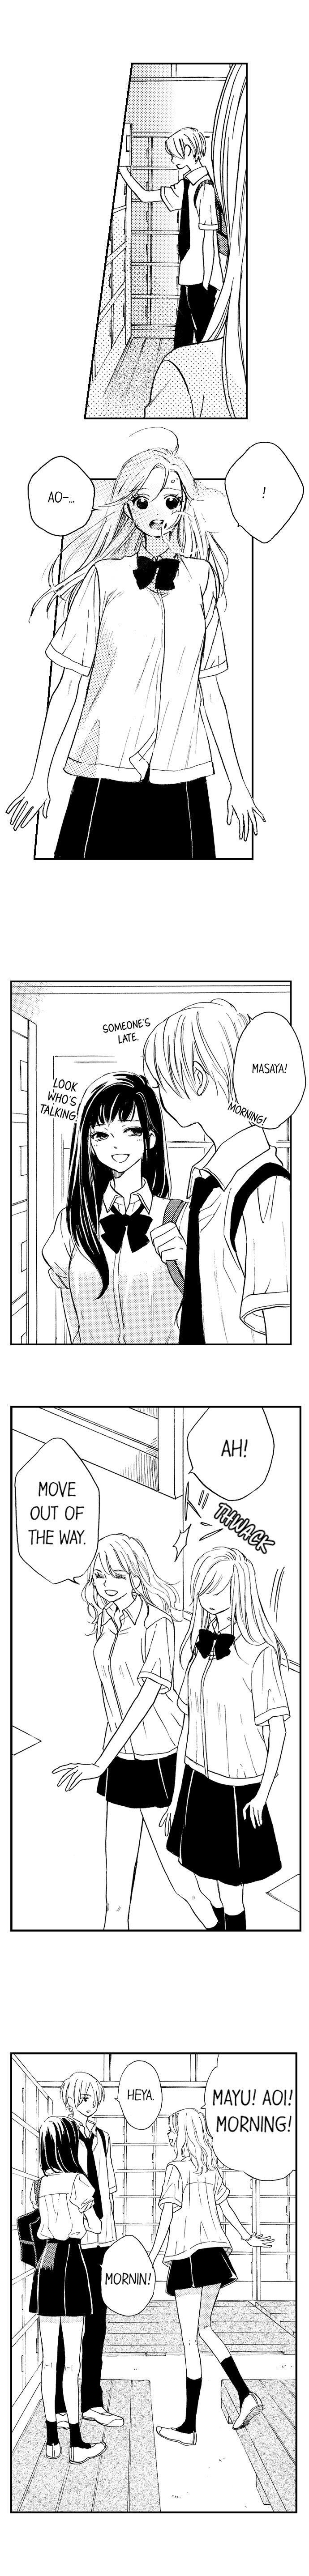 Mandatory Sex Class in Another World - Chapter 11 Page 5